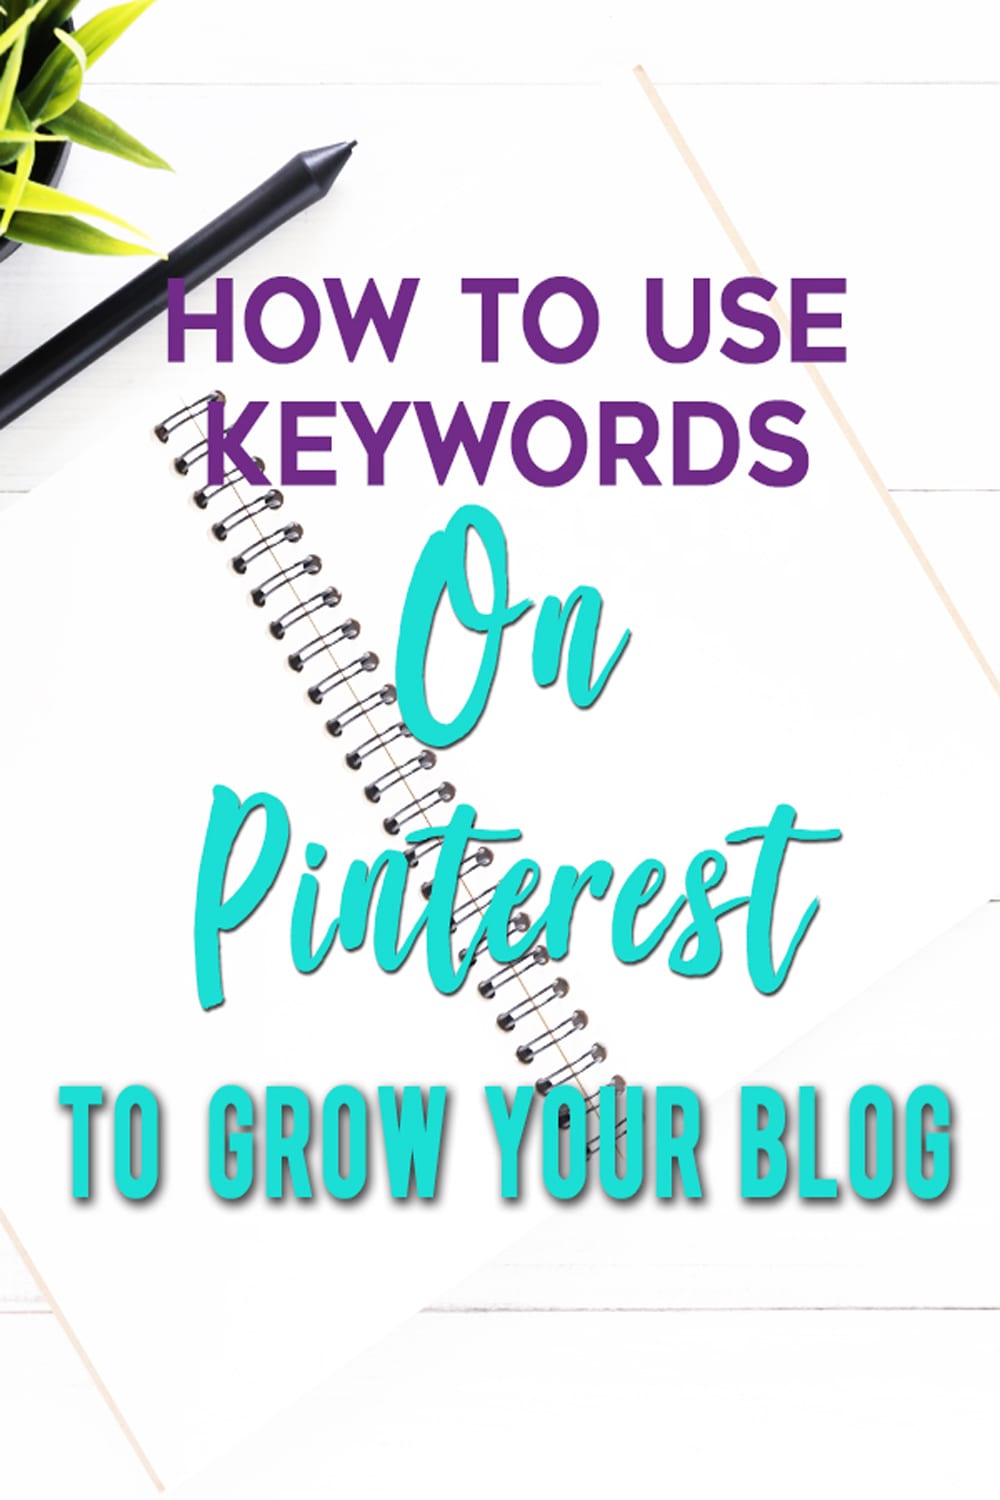 I want to set things straight and tell you that Pinterest is NOT a social media platform. You may not realize that Pinterest is a powerful search based platform with an incredibly powerful keyword tool. As a result, keywords on Pinterest are incredibly important.